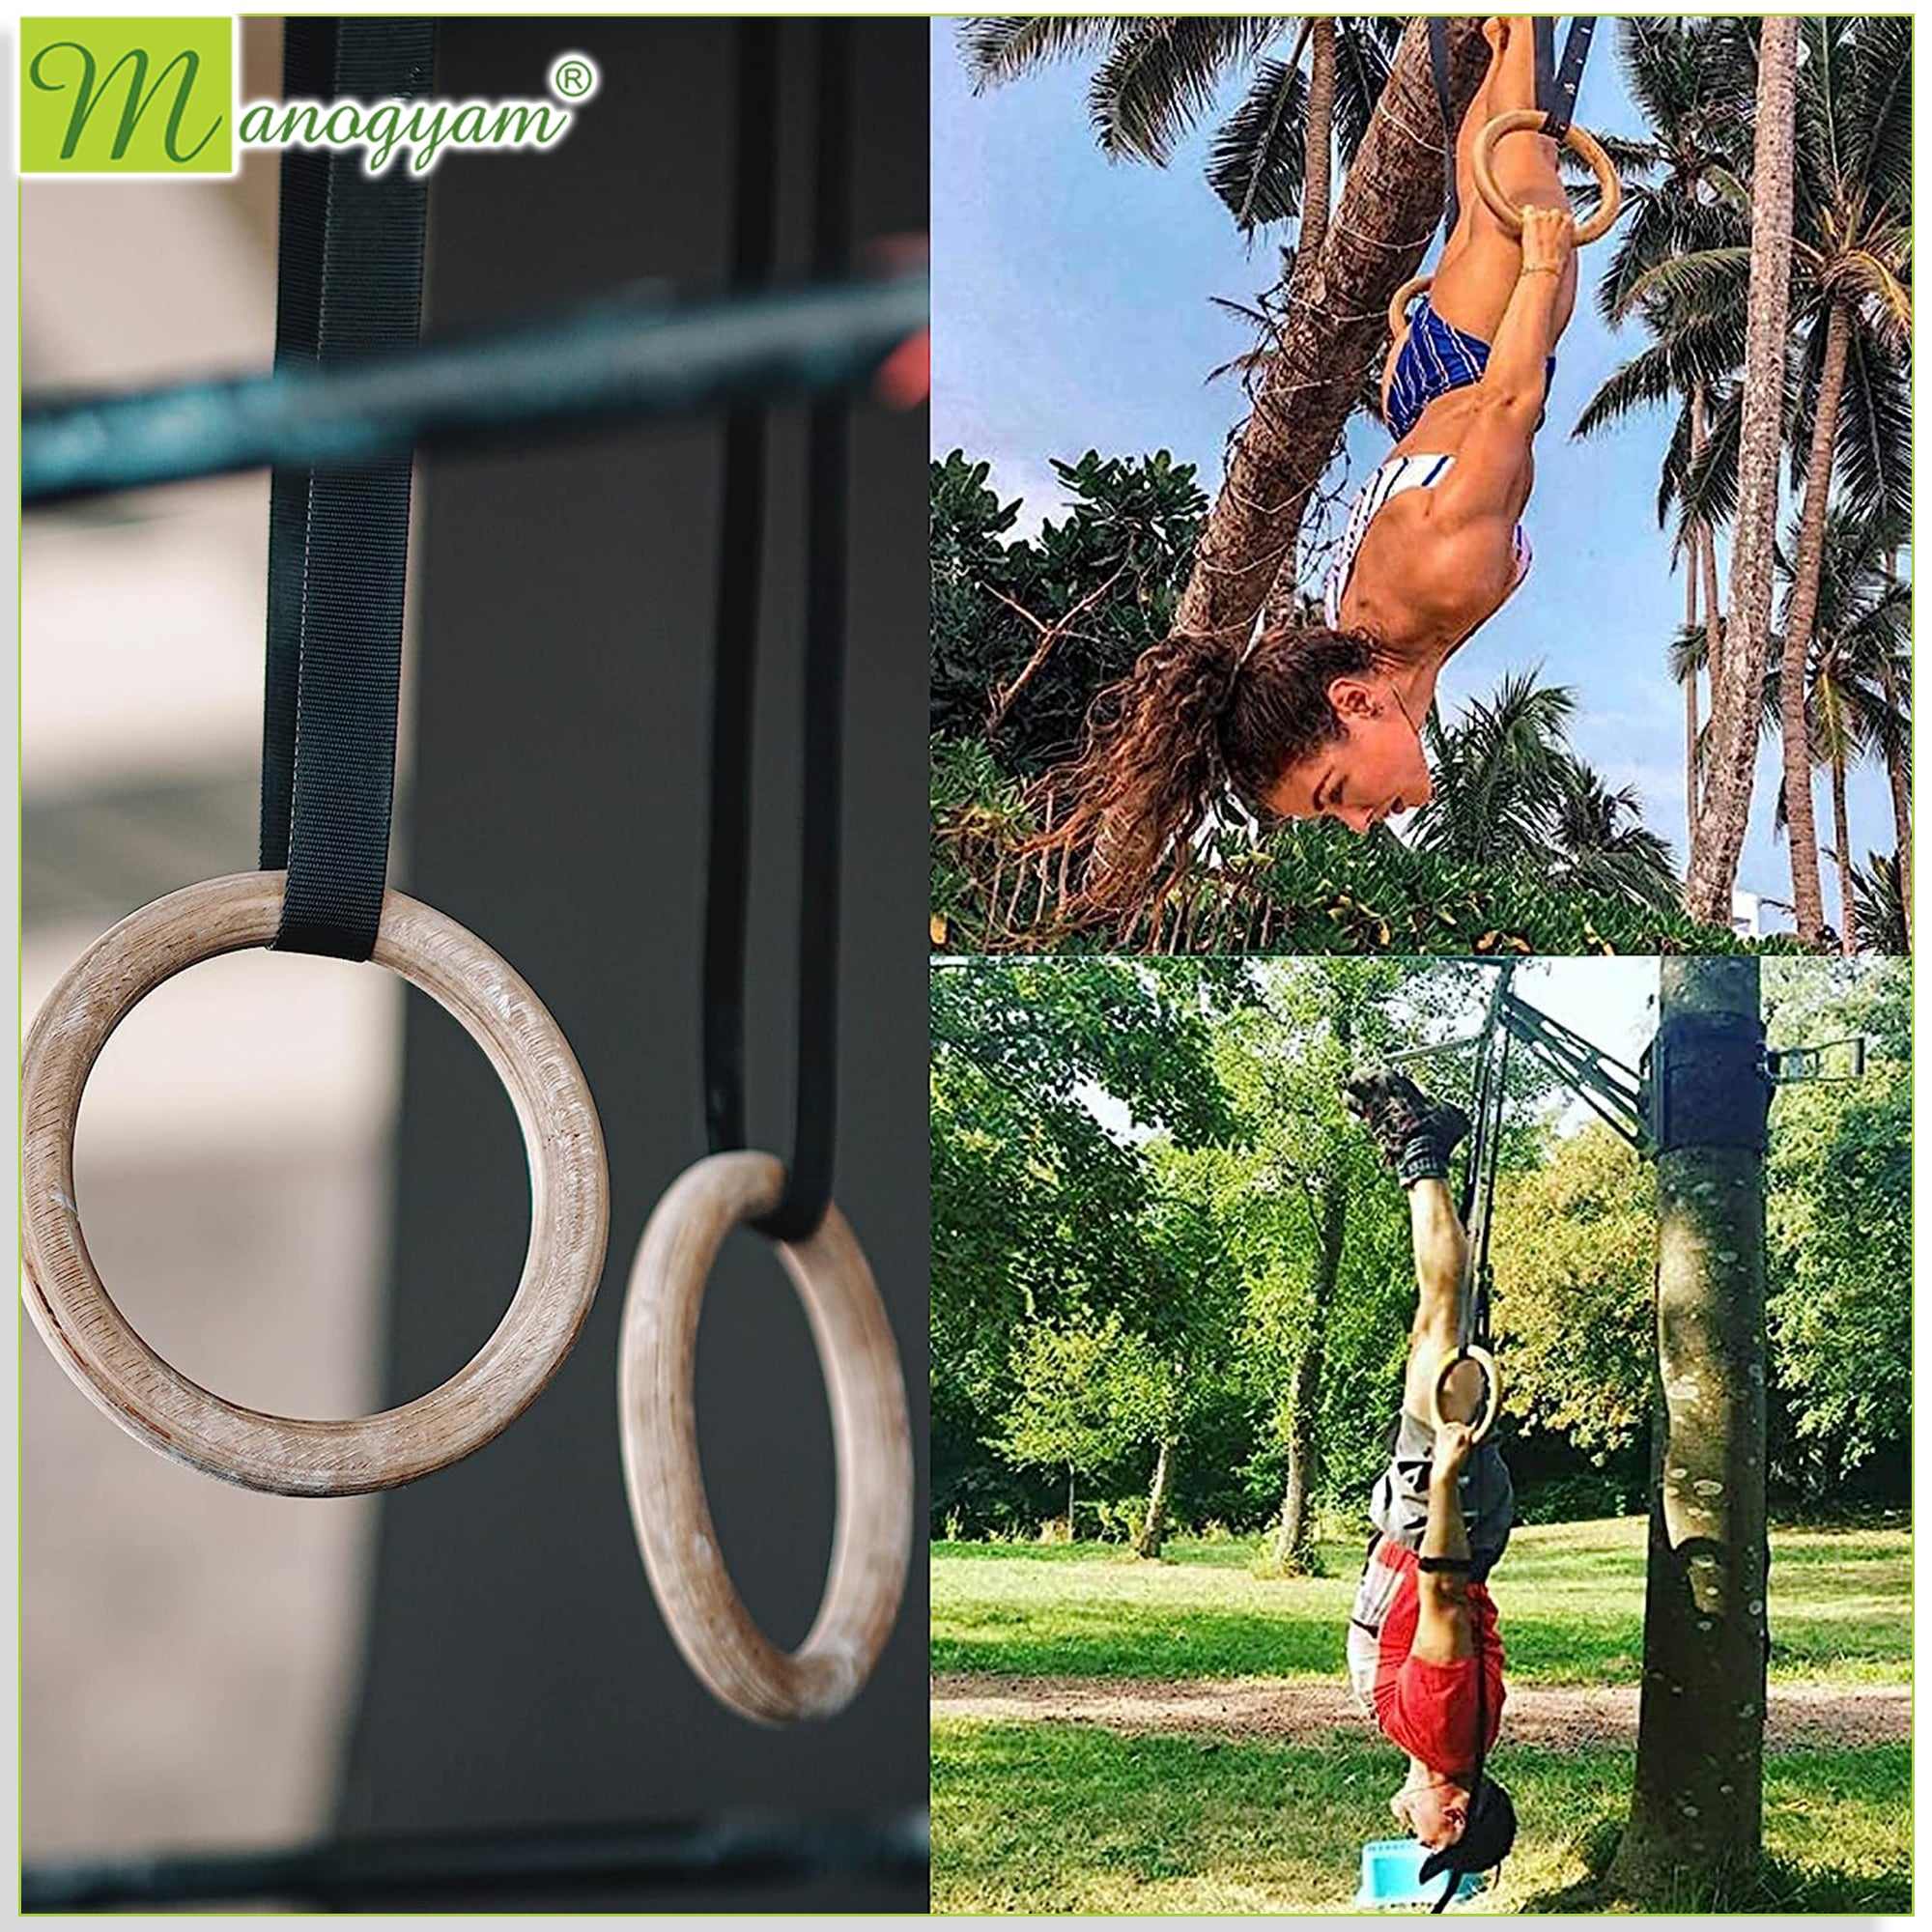 Gymnastic Roman Rings - Best Quality & Affordable Wood Rings for Exercise